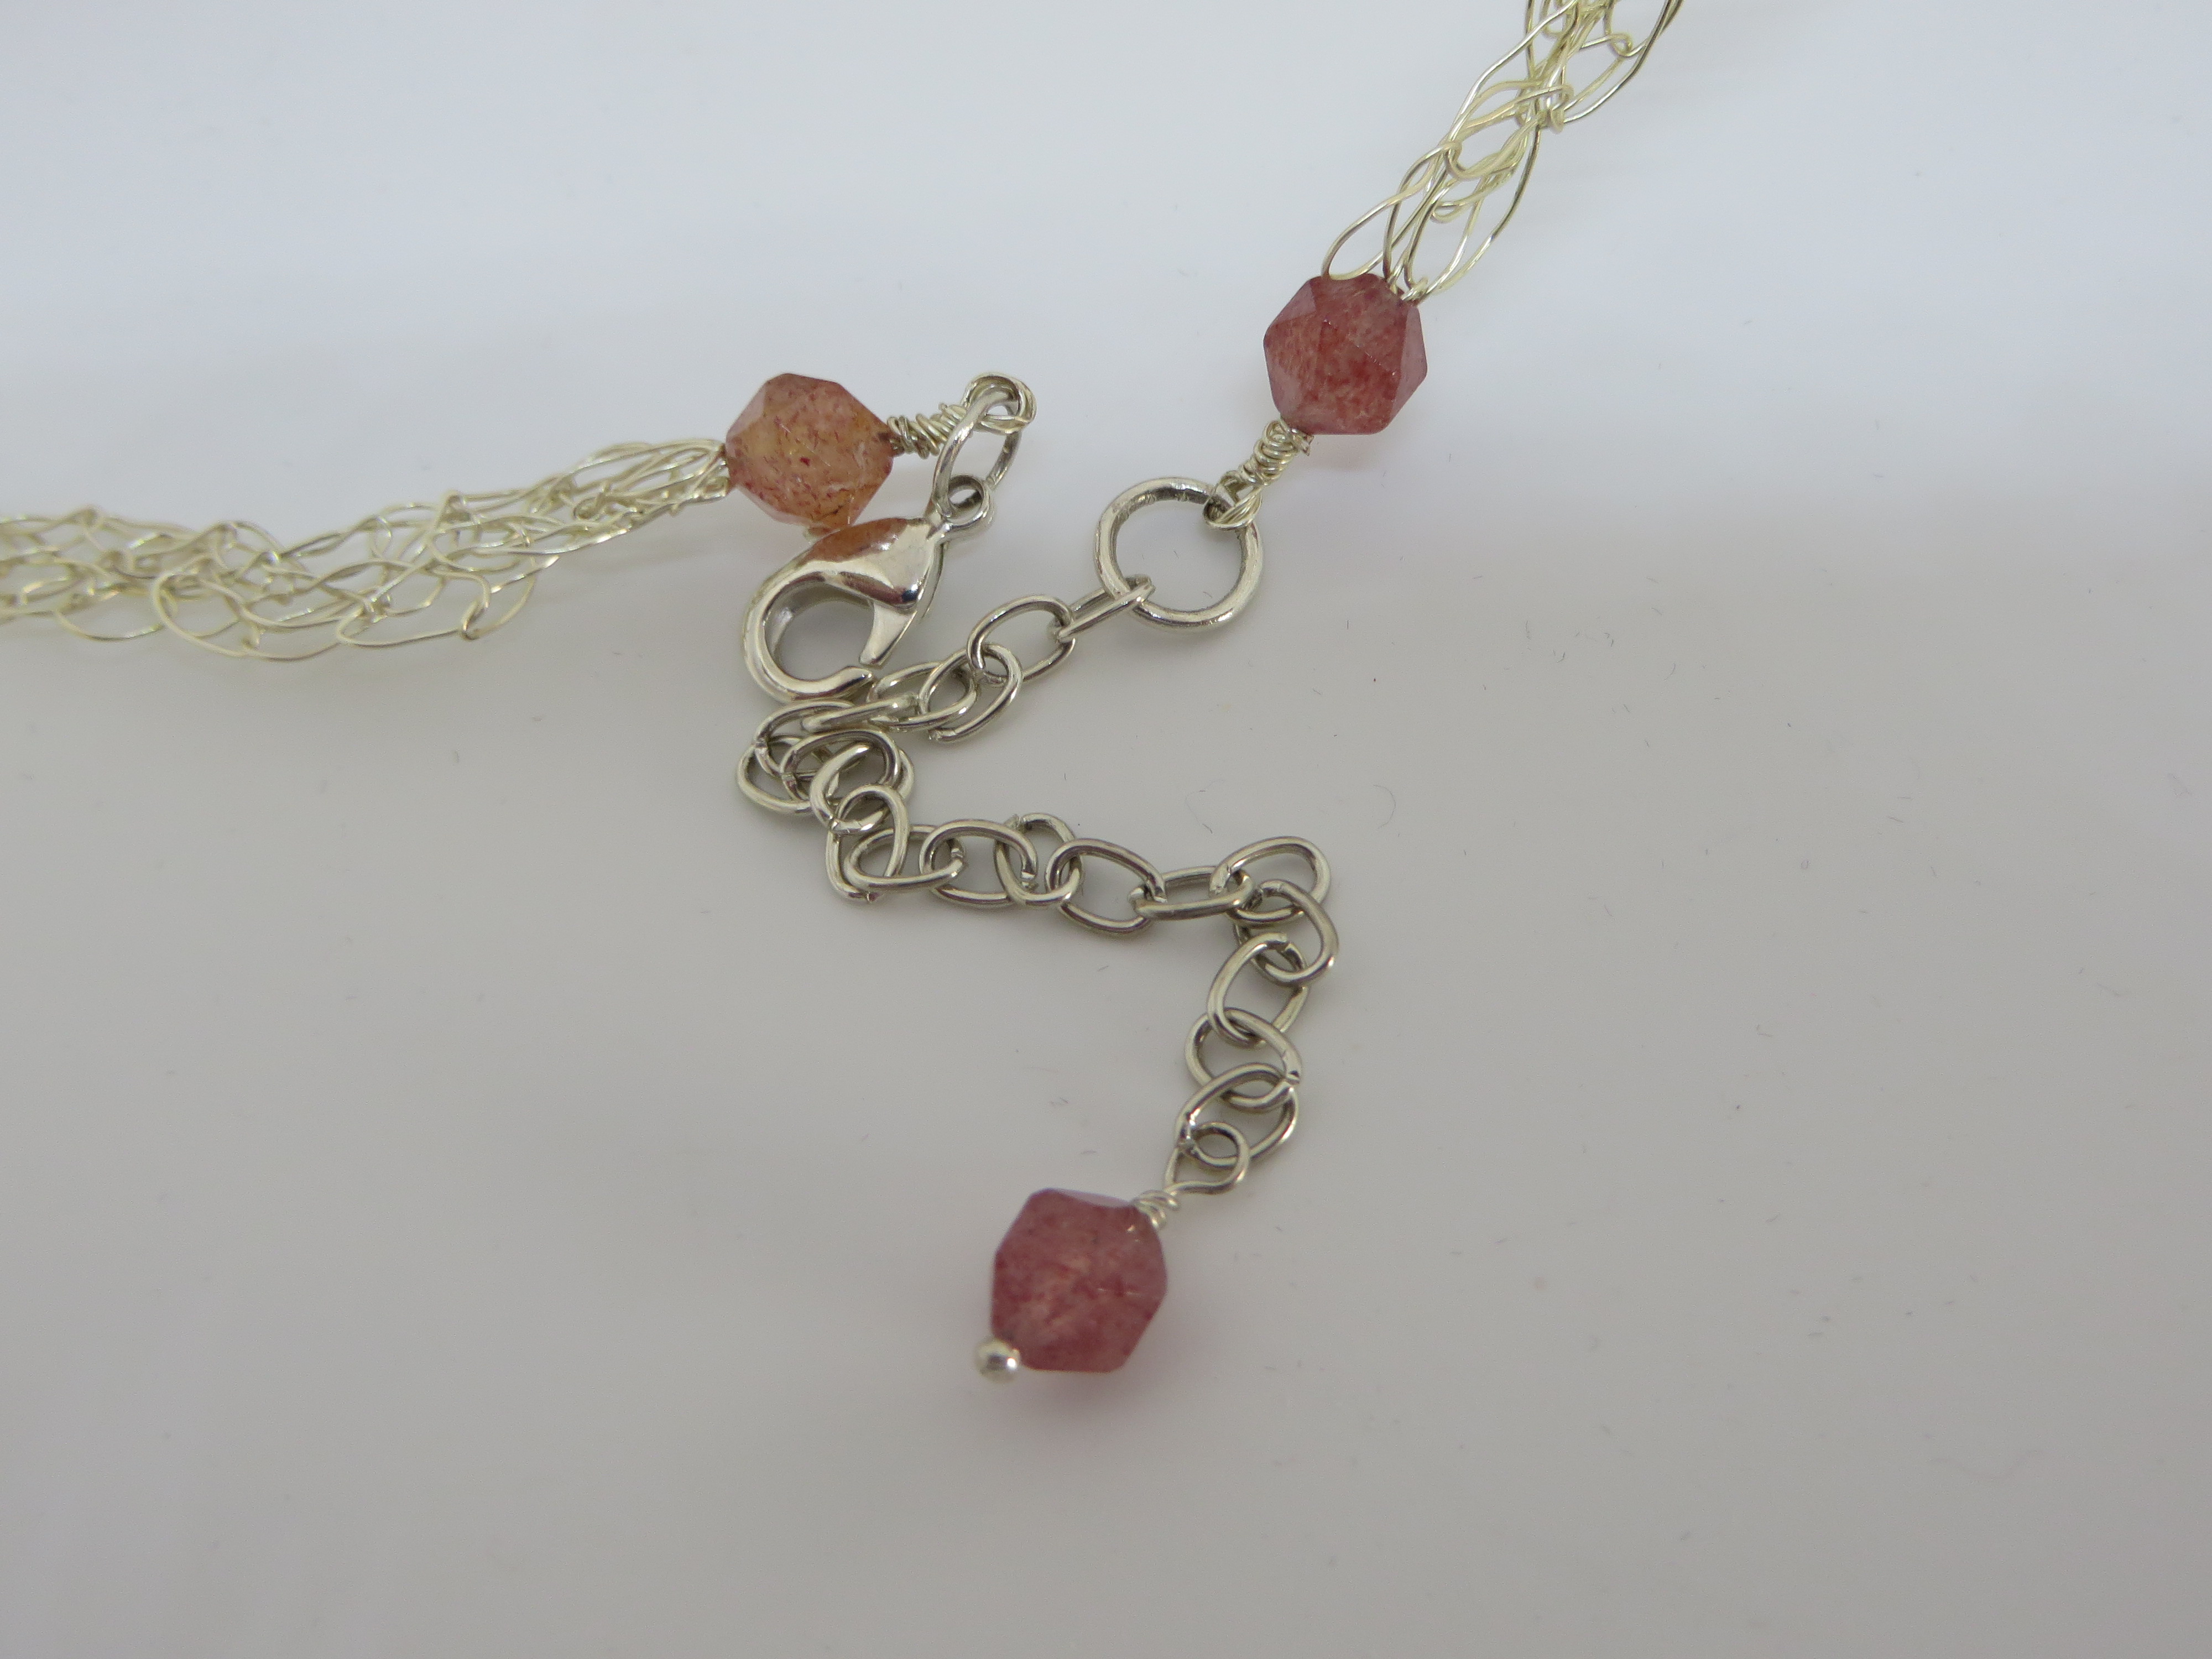 A Strawberry Quartz Necklace & Earrings | Janell Jewellry